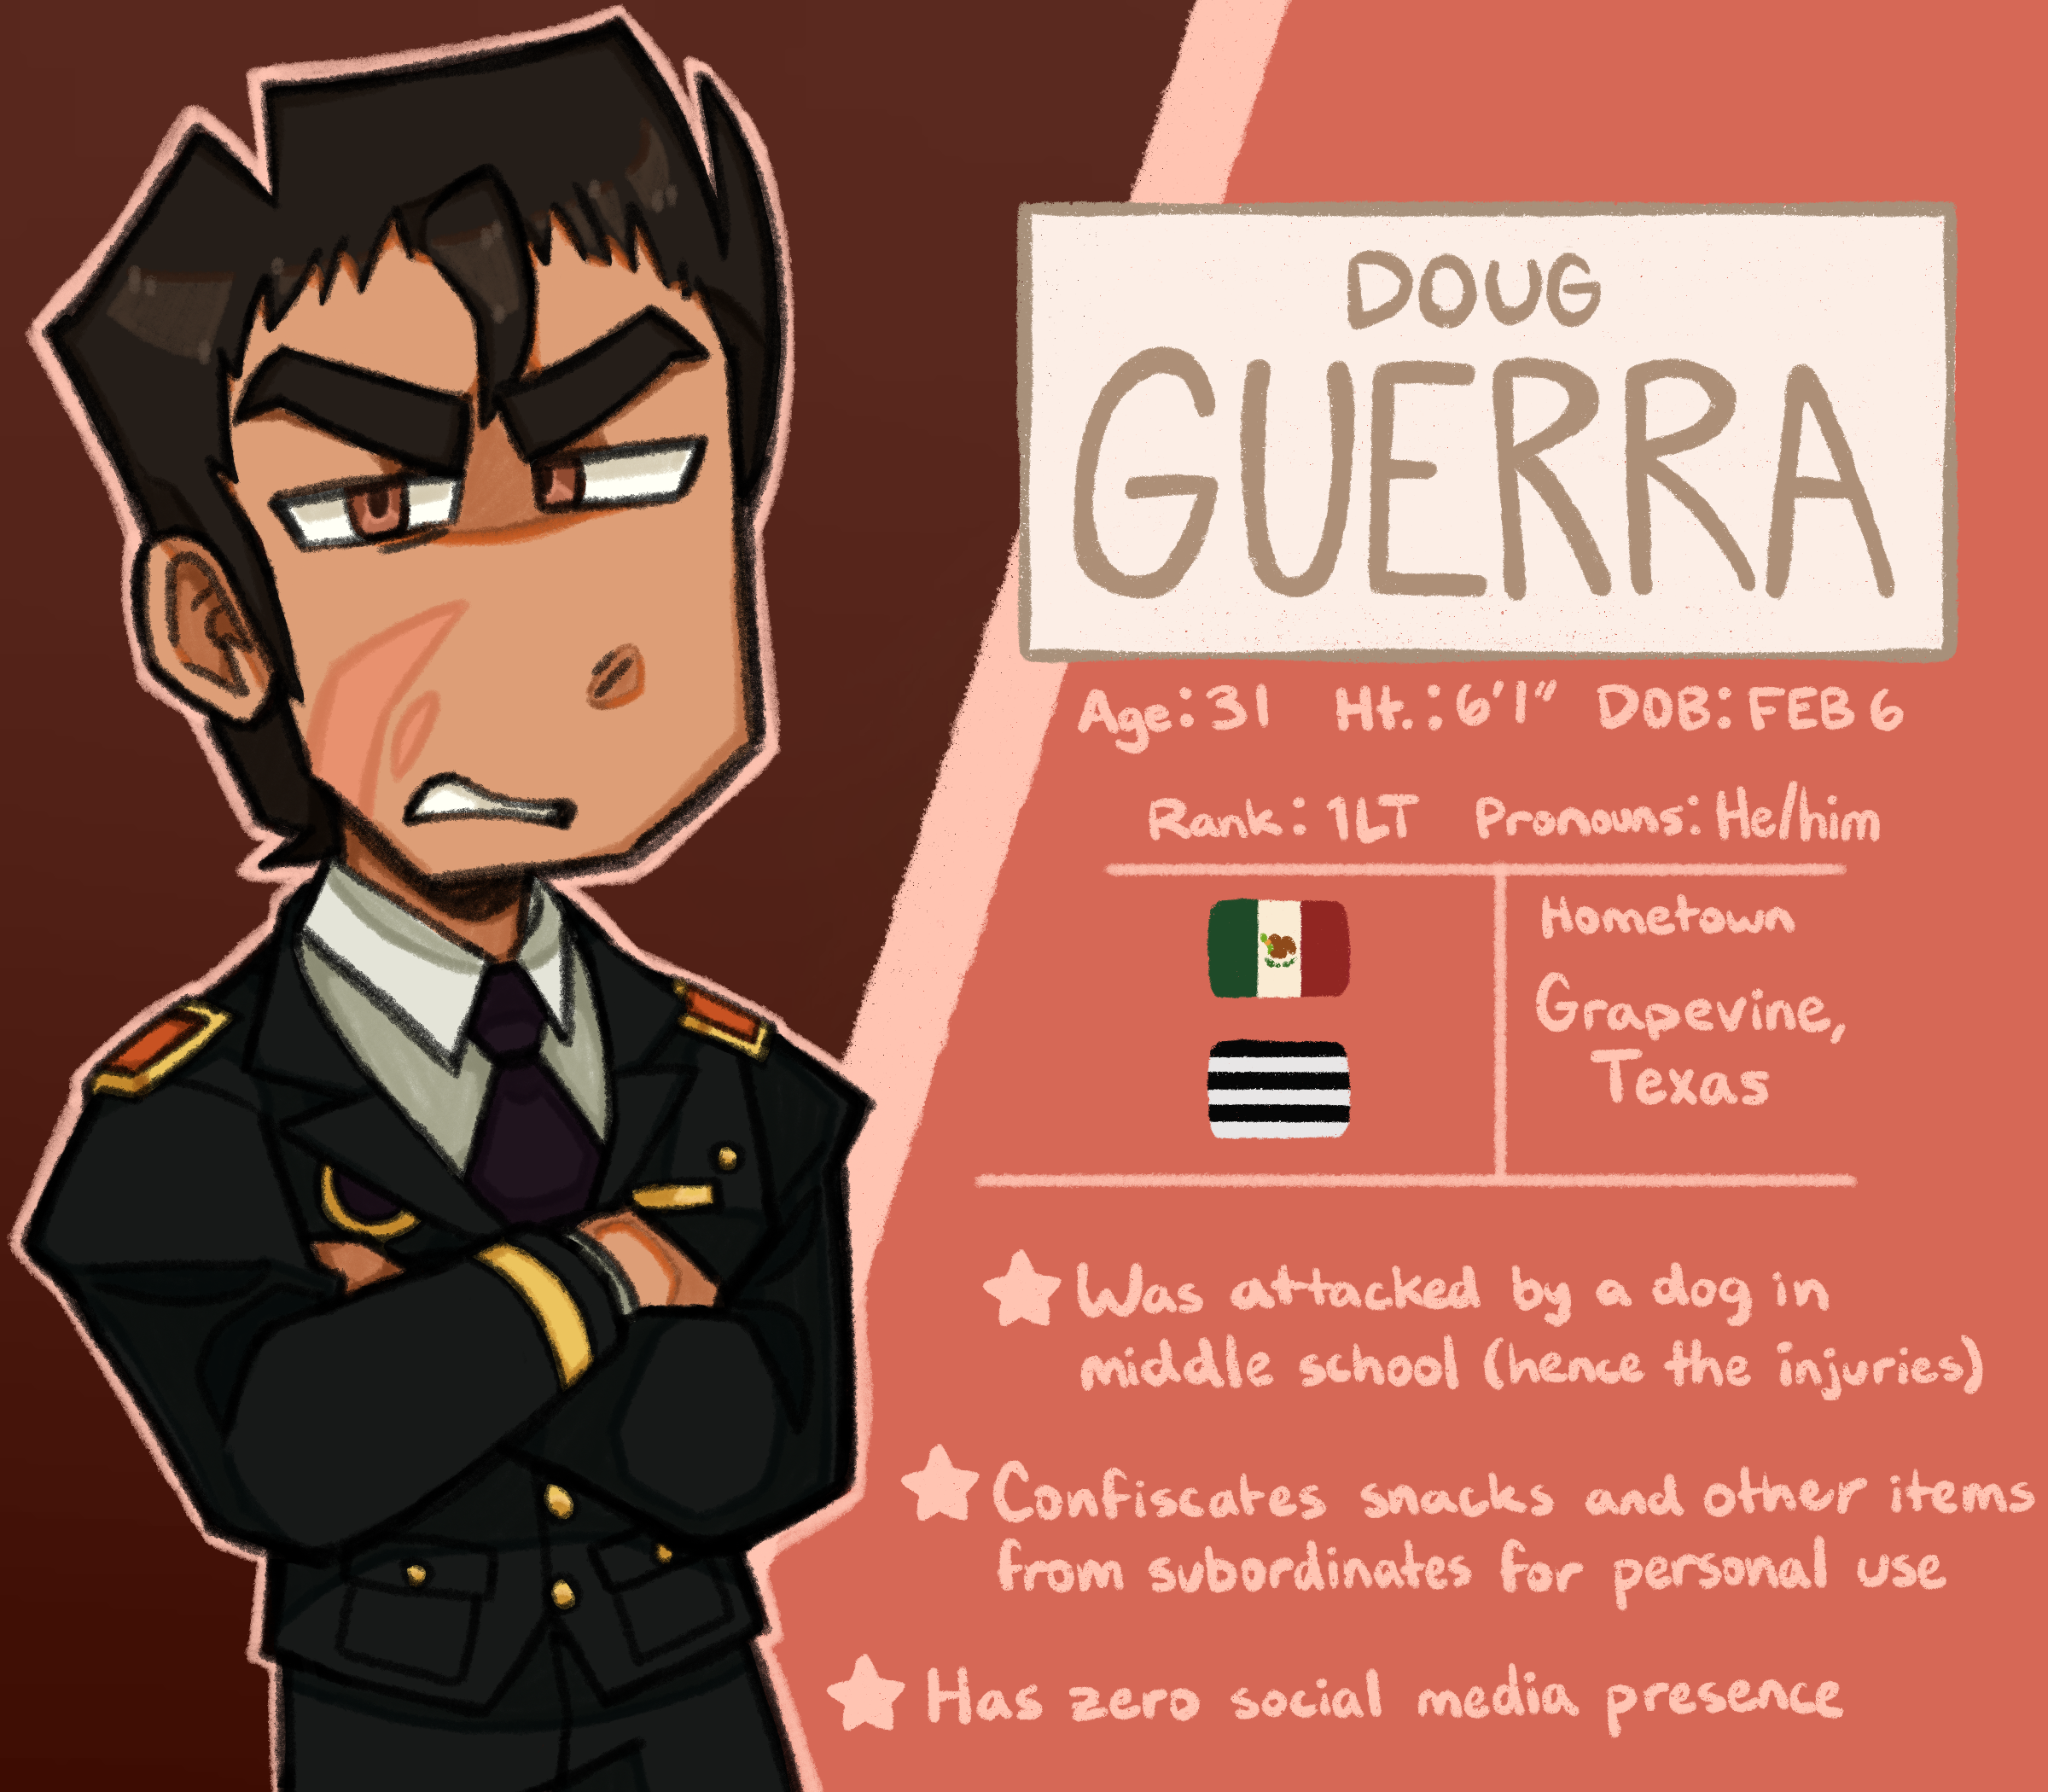 A character bio for Doug Guerra. Age: 31, Height: 6'1, Date of Birth: February 6. Rank: Lieutenant, Pronouns: He/him. Guerra is of Mexican descent, and identifies as cisgender and straight. His hometown is Grapevine, Texas. Fun facts include: he was attacked by a dog in middle school (hence the injuries), he confiscates snacks and other items from subordinates for personal use, and he has zero social media presence.